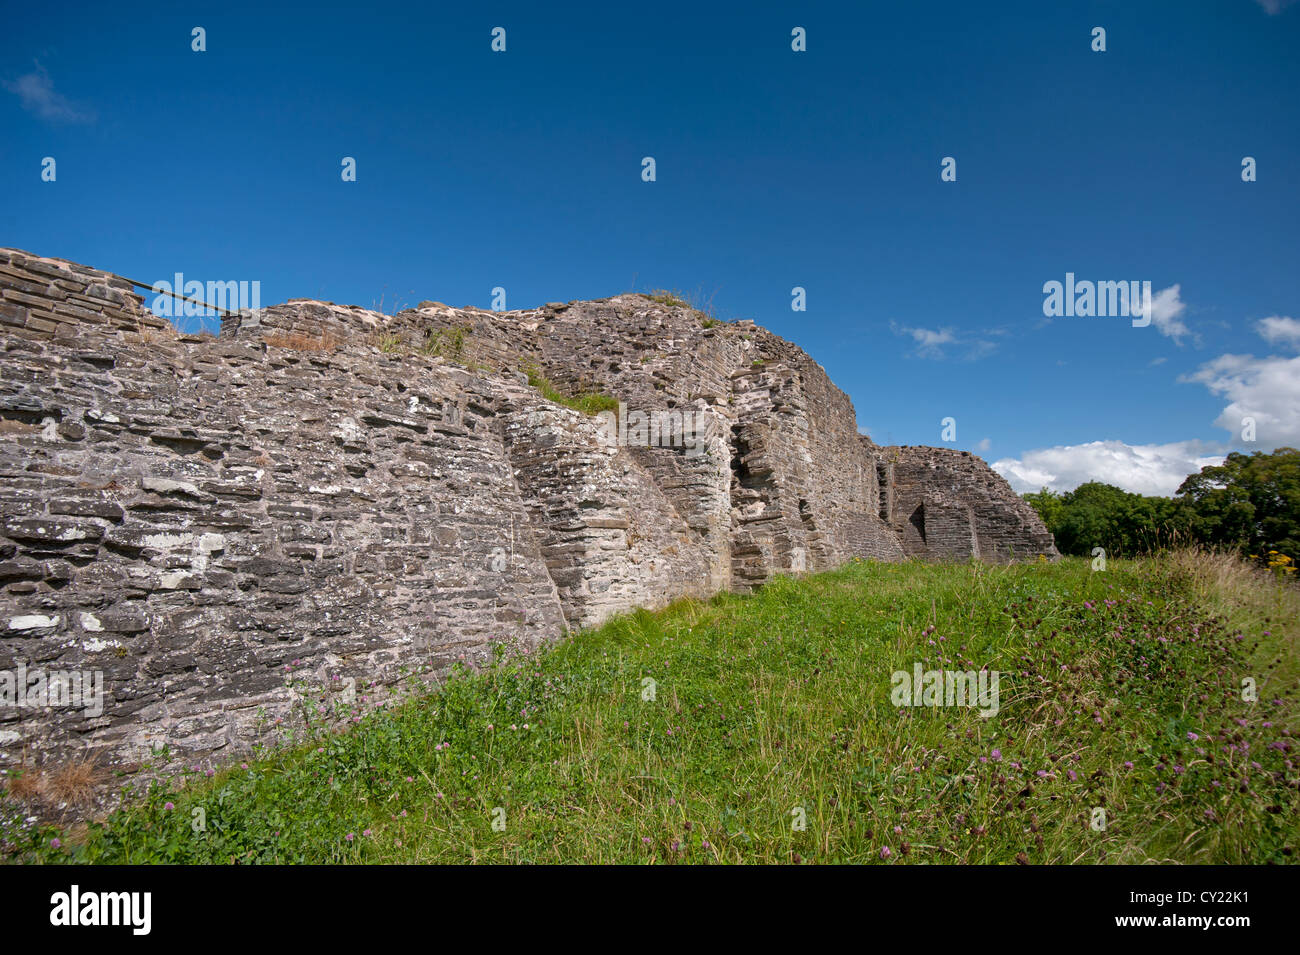 Dolforwyn Castle, recently excavated ruins in Powys, Montgomeryshire. Mid Wales.  SCO 8706 Stock Photo